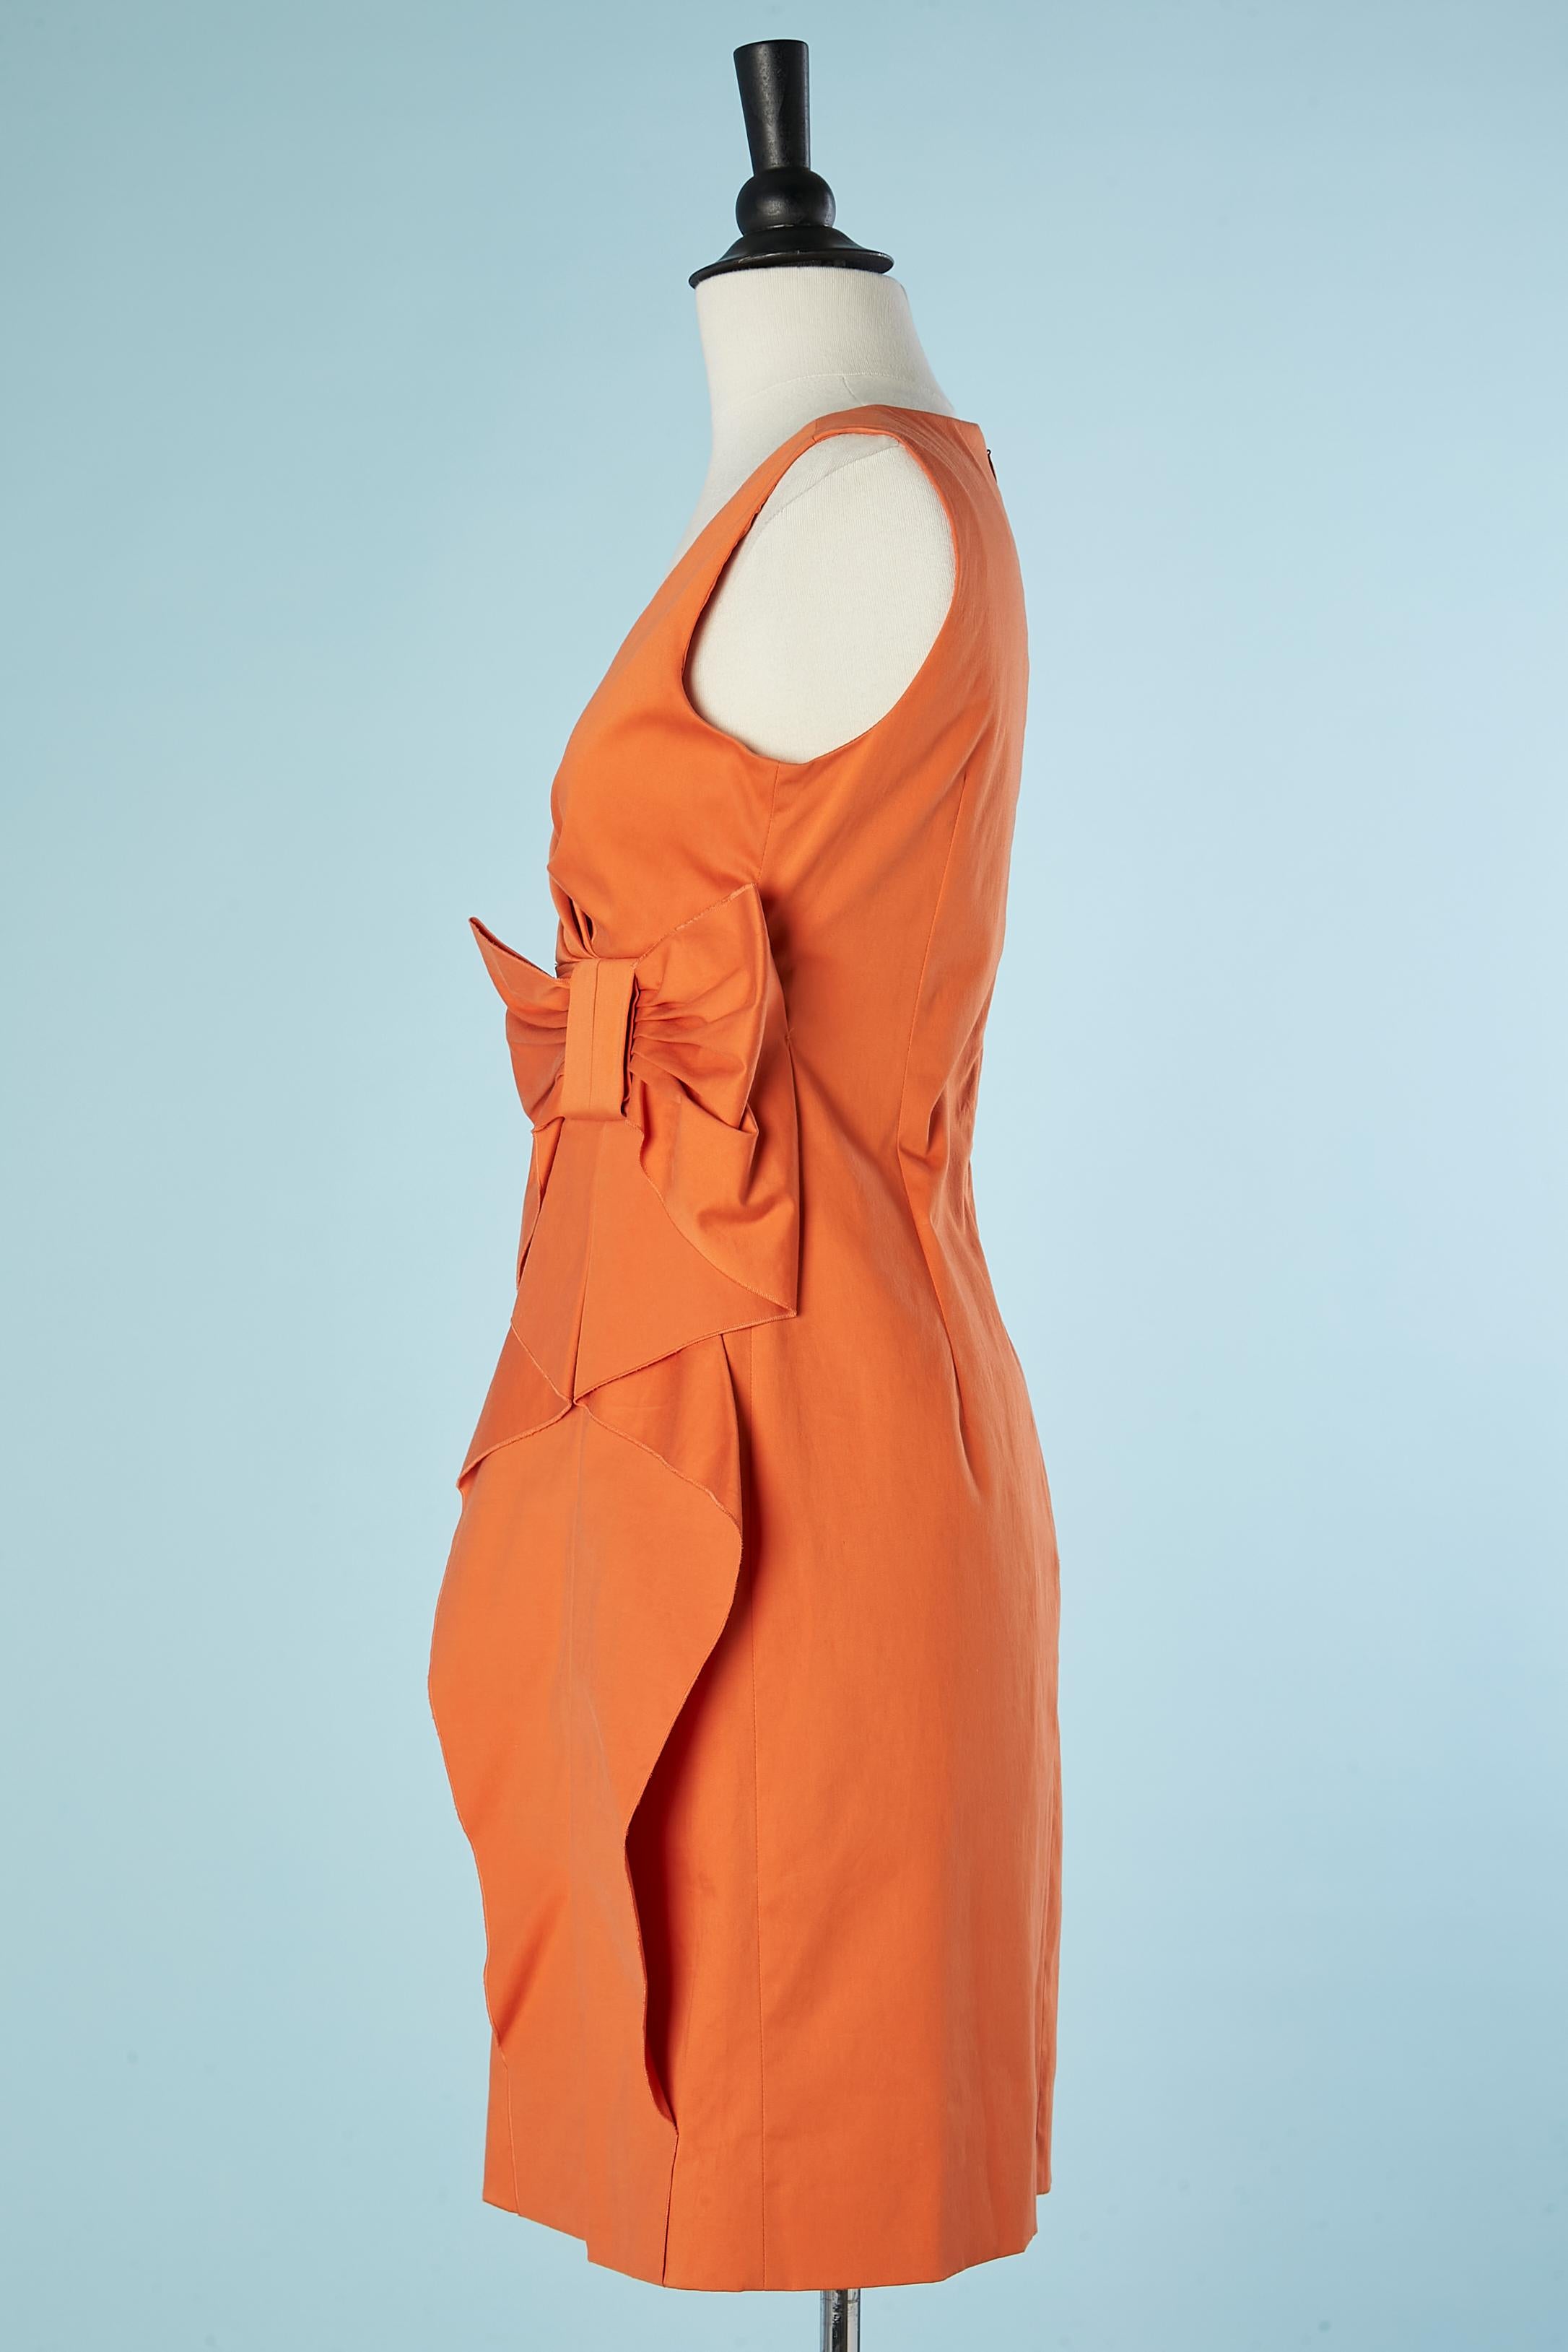 Women's Orange cotton cocktail dress with bow RED Valentino  For Sale